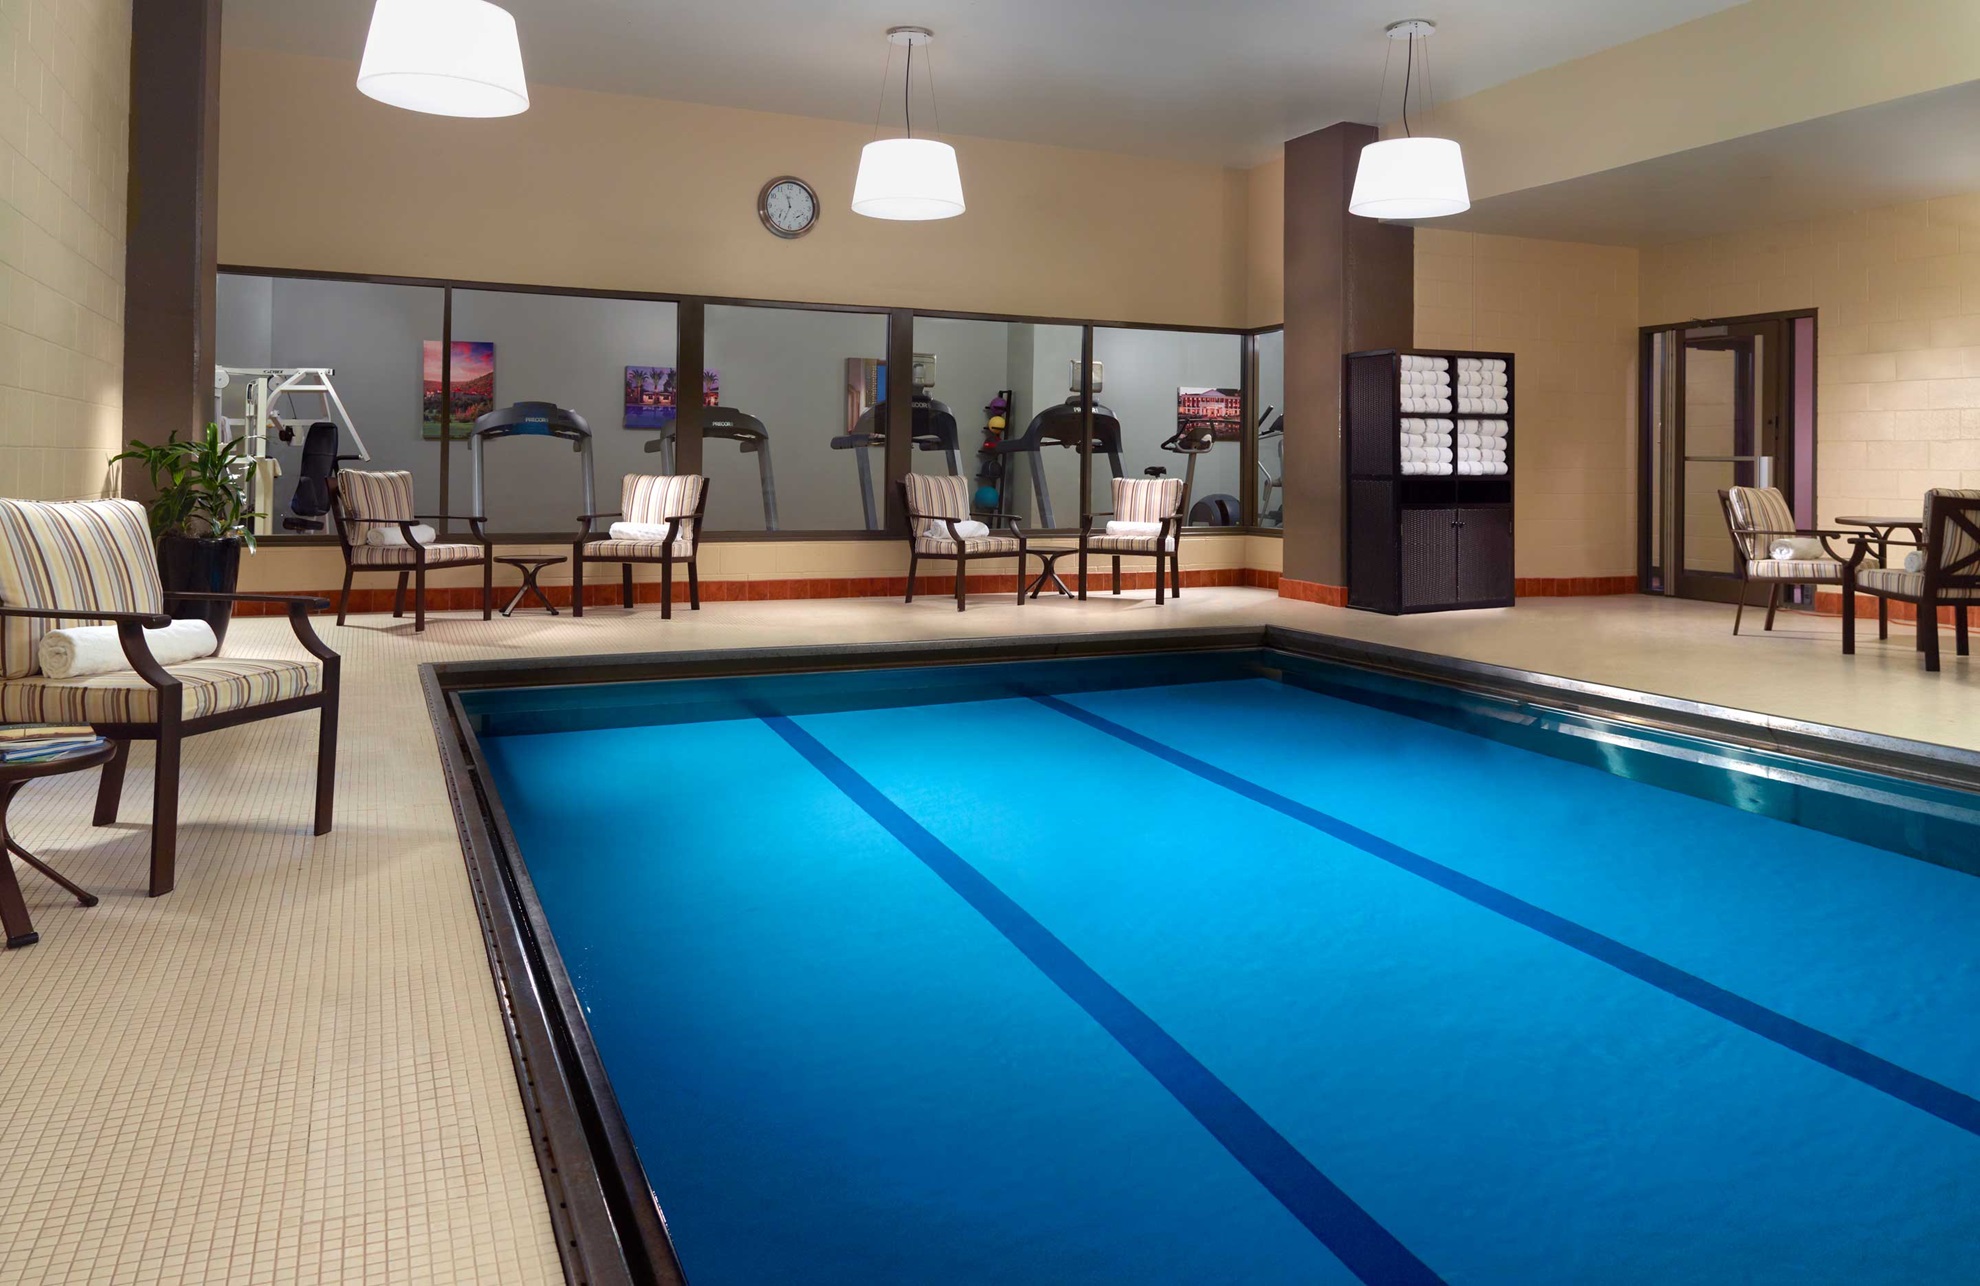 Indoor pool area at Omni Sevrin